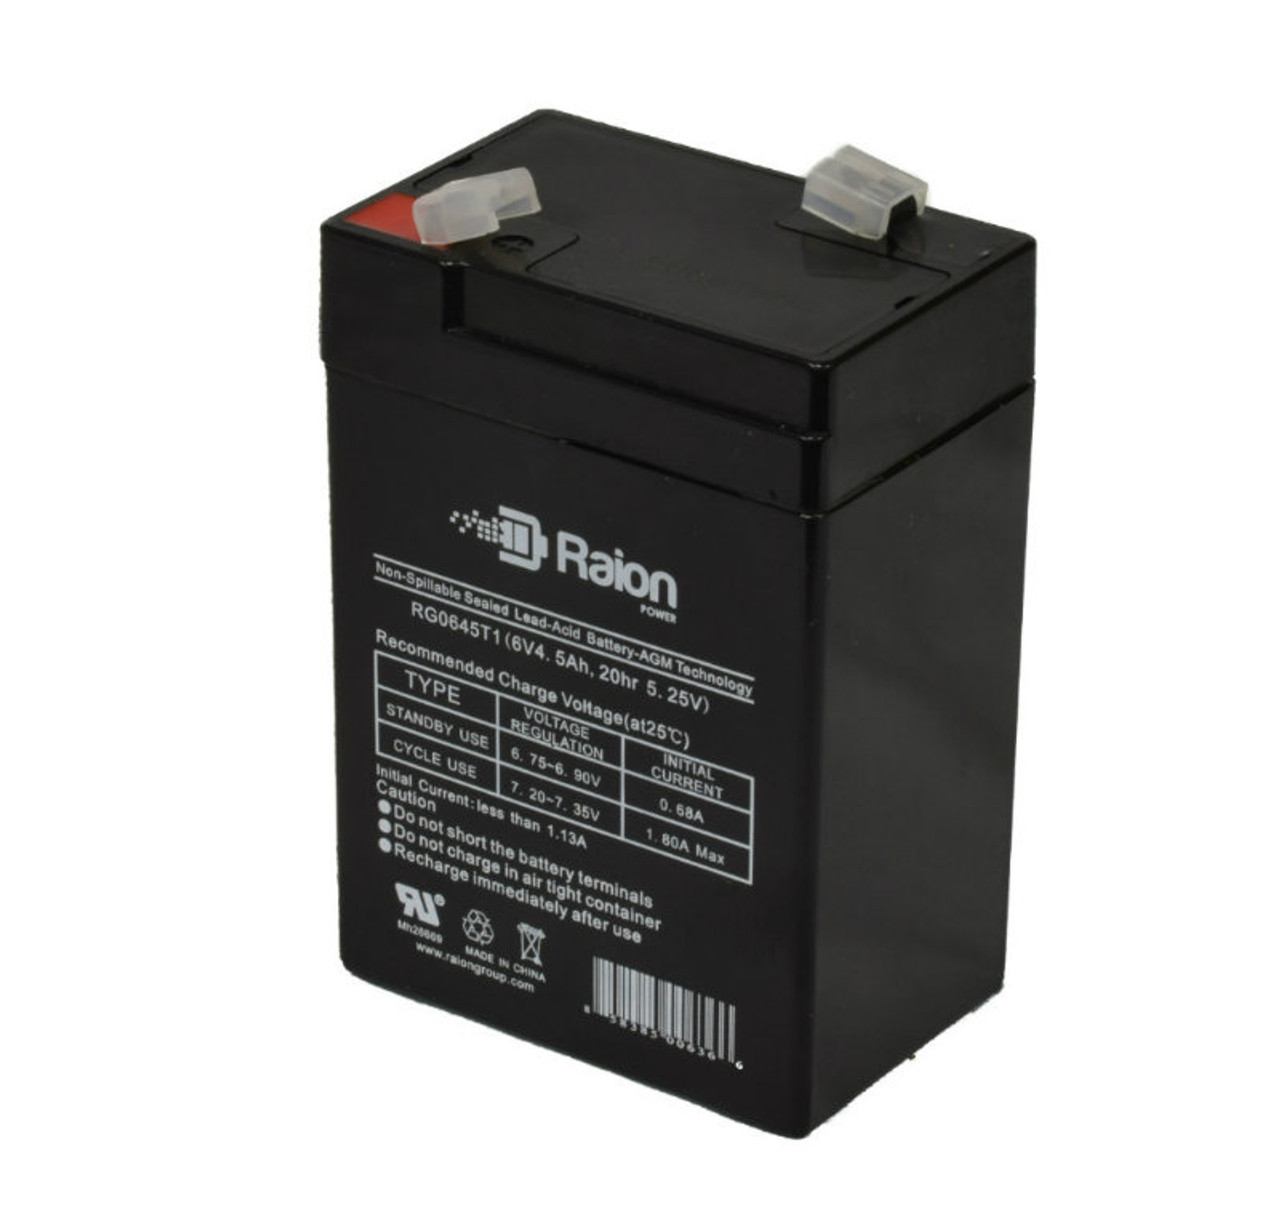 Raion Power RG0645T1 6V 4.5Ah Replacement Battery Cartridge for Dyna-Ray B6V4